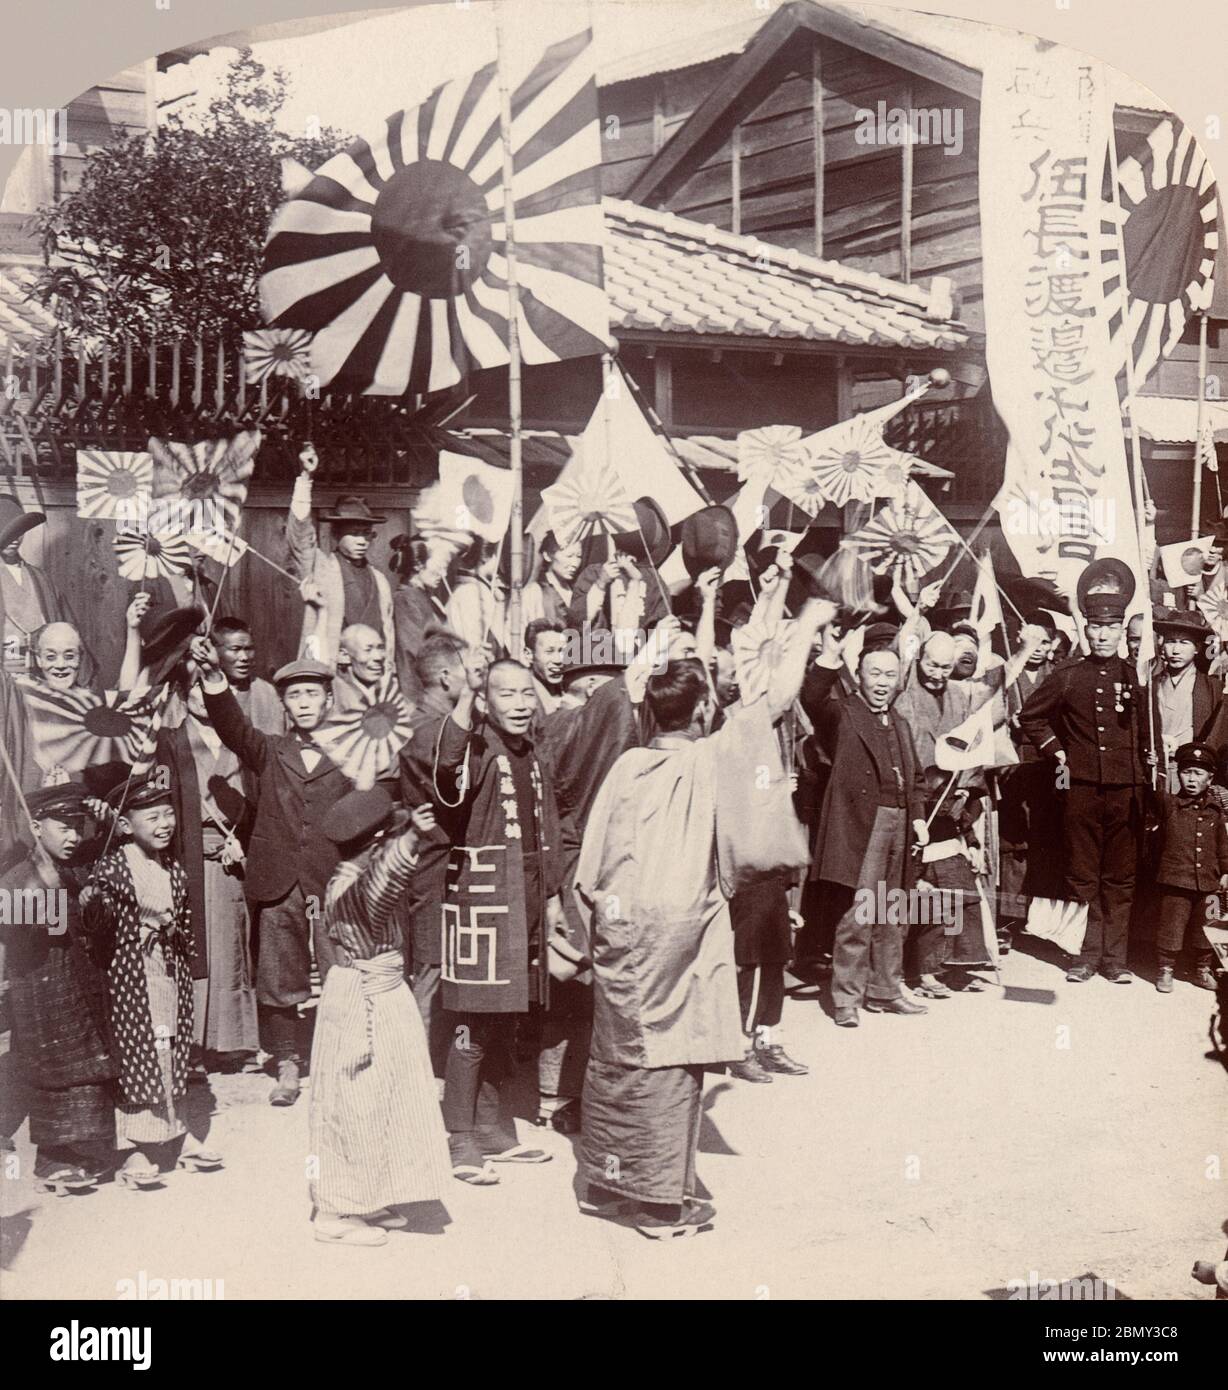 [ 1900s Japan - Russo-Japanese War ] —   Family and friends saying farewell to a young man going to war during the Russo-Japanese War (1904-1905), 1904 (Meiji 37).  They are waving rising sun flags (旭日旗, Kyokujitsu-ki). The flag is still used as Japan's naval ensign (軍艦旗, Gunkanki). Stock Photo